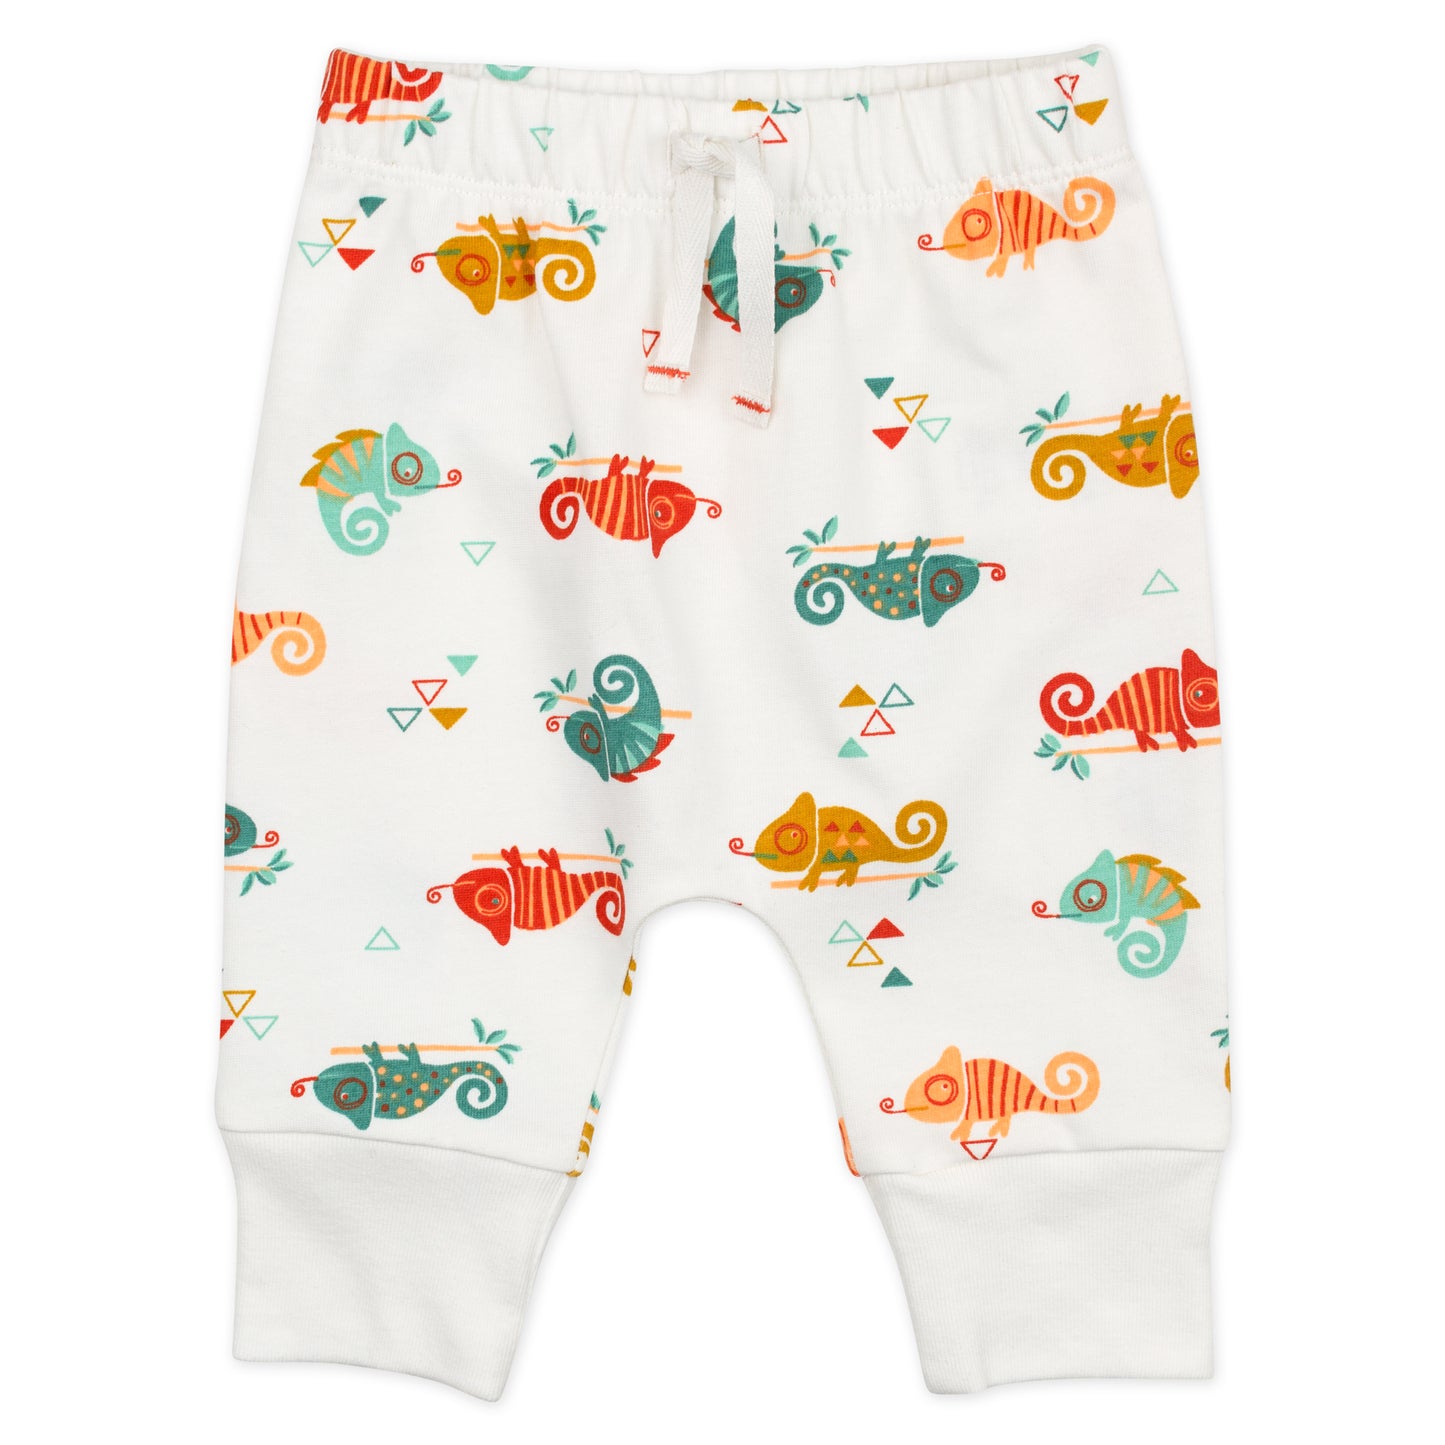 2-Pack Organic Cotton Pant in Chameleon Print